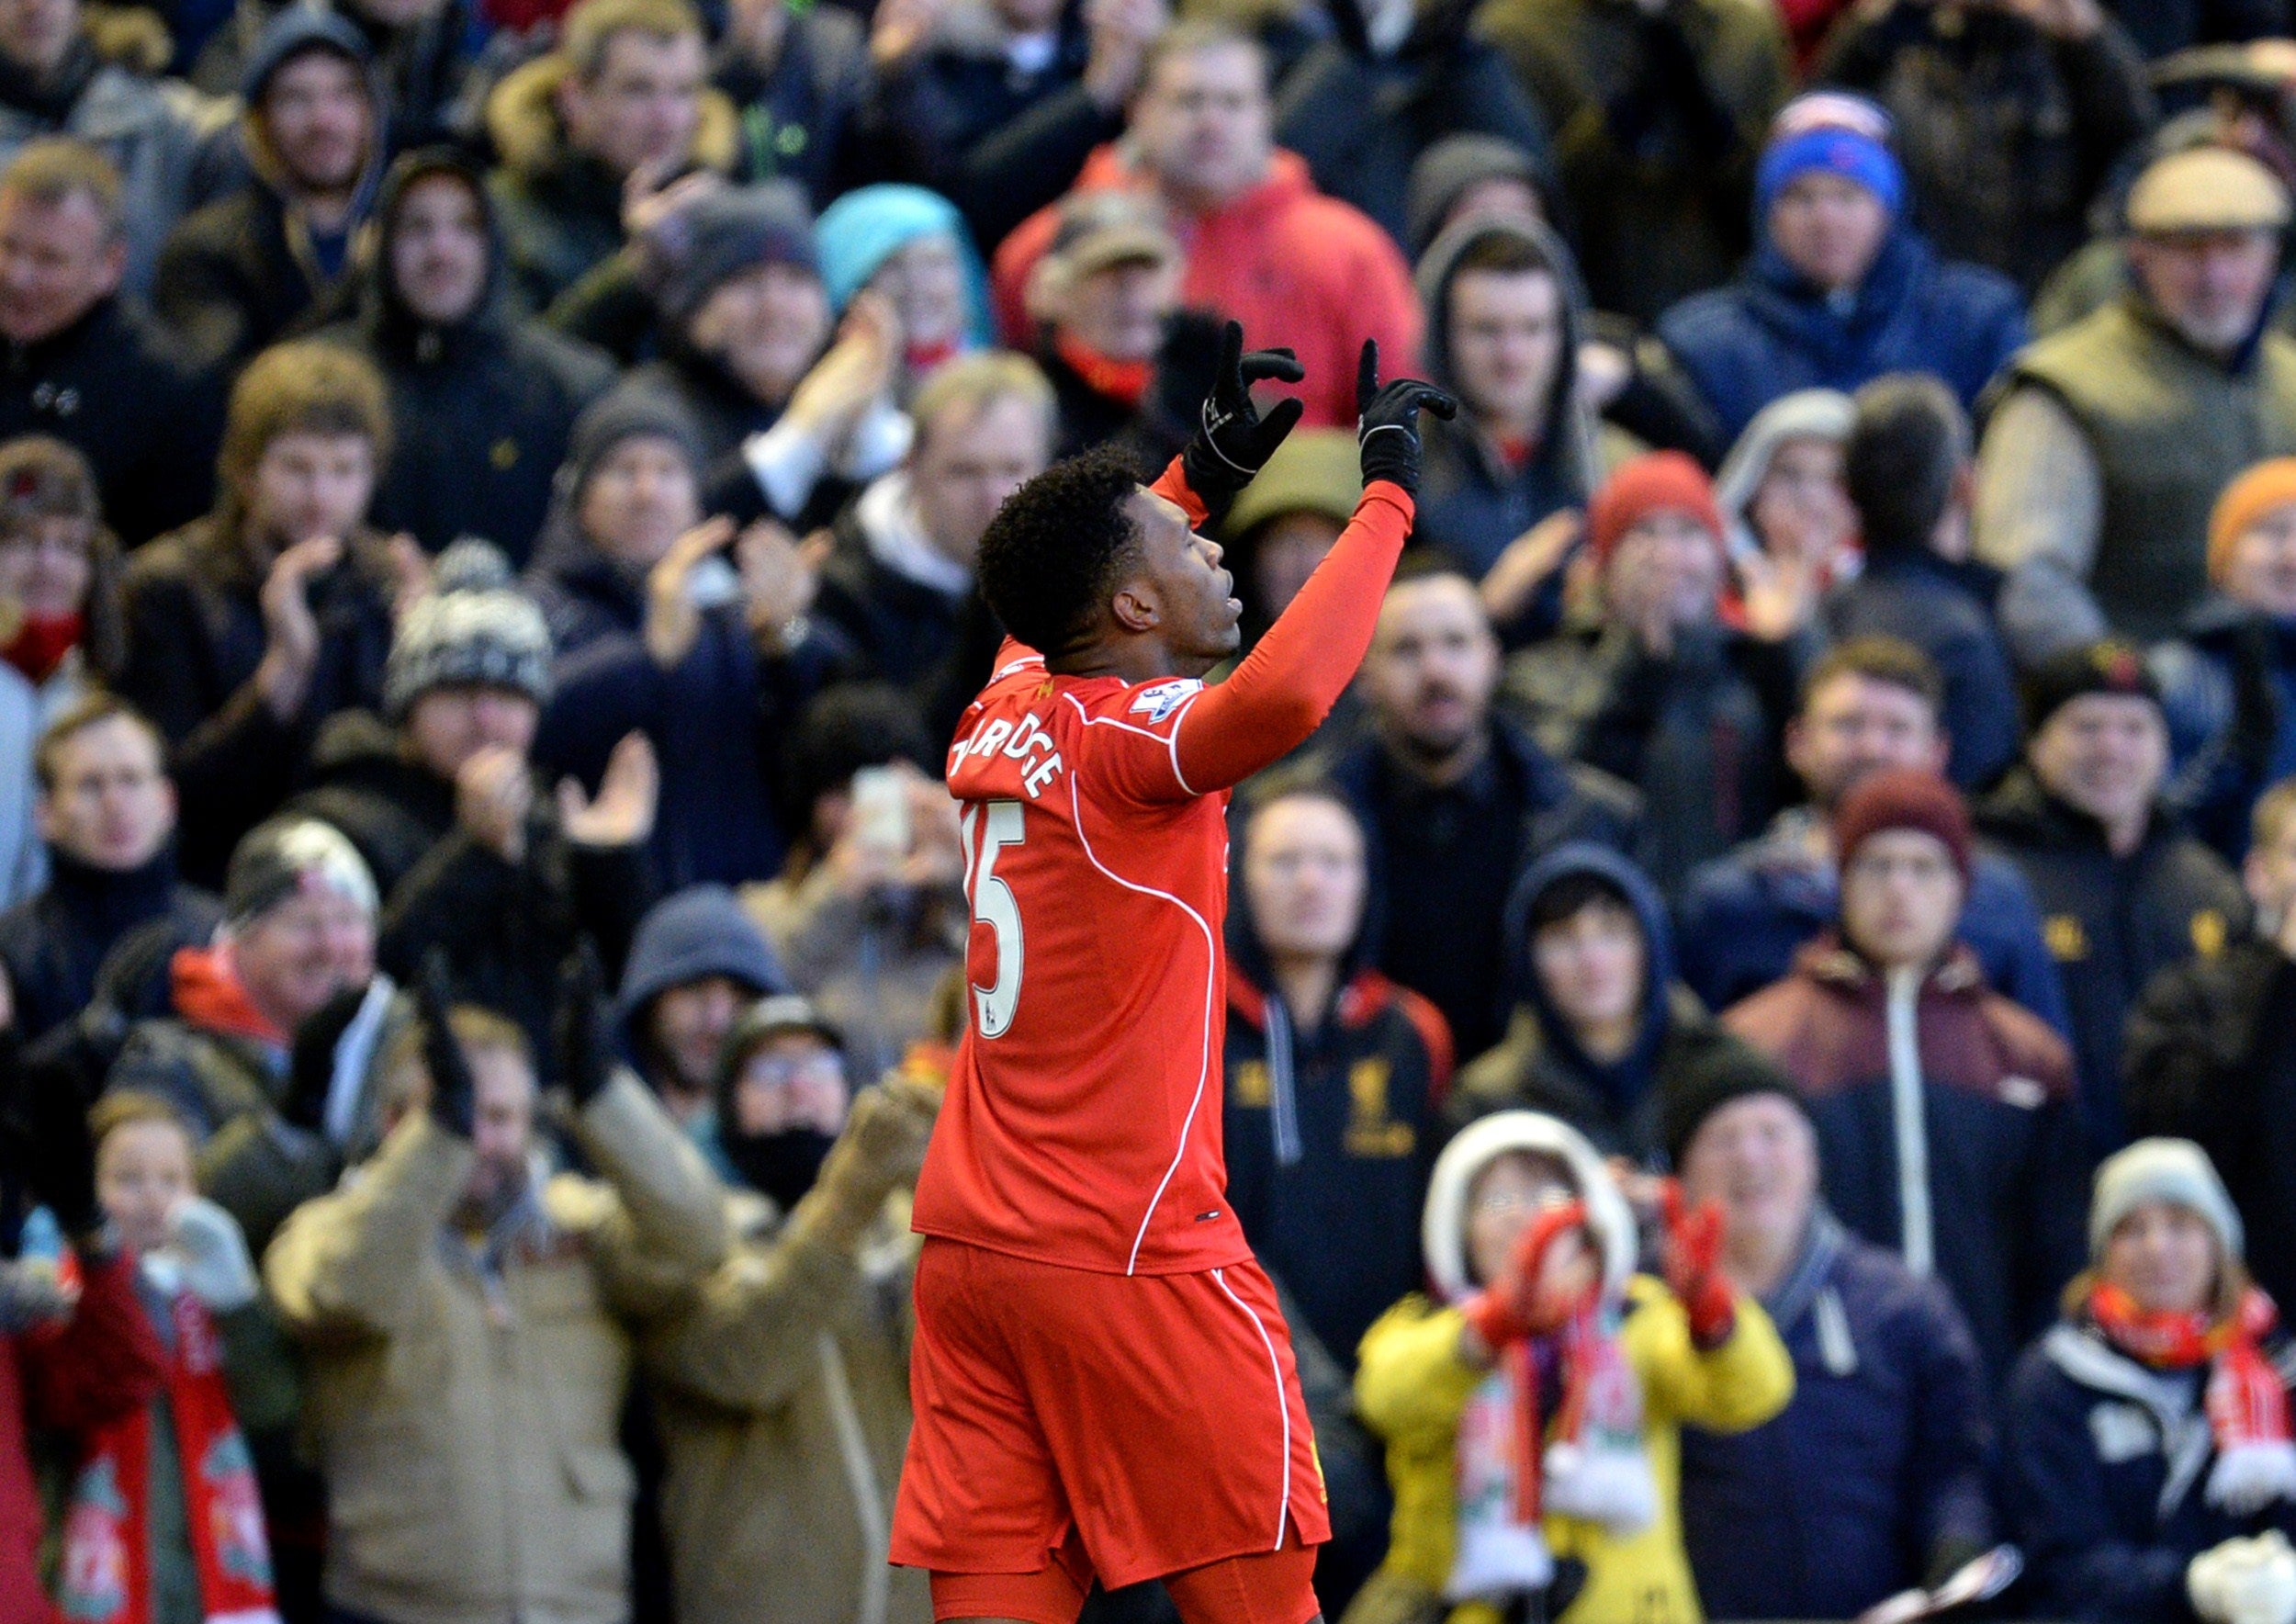 Daniel Sturridge marked his return from injury with a goal